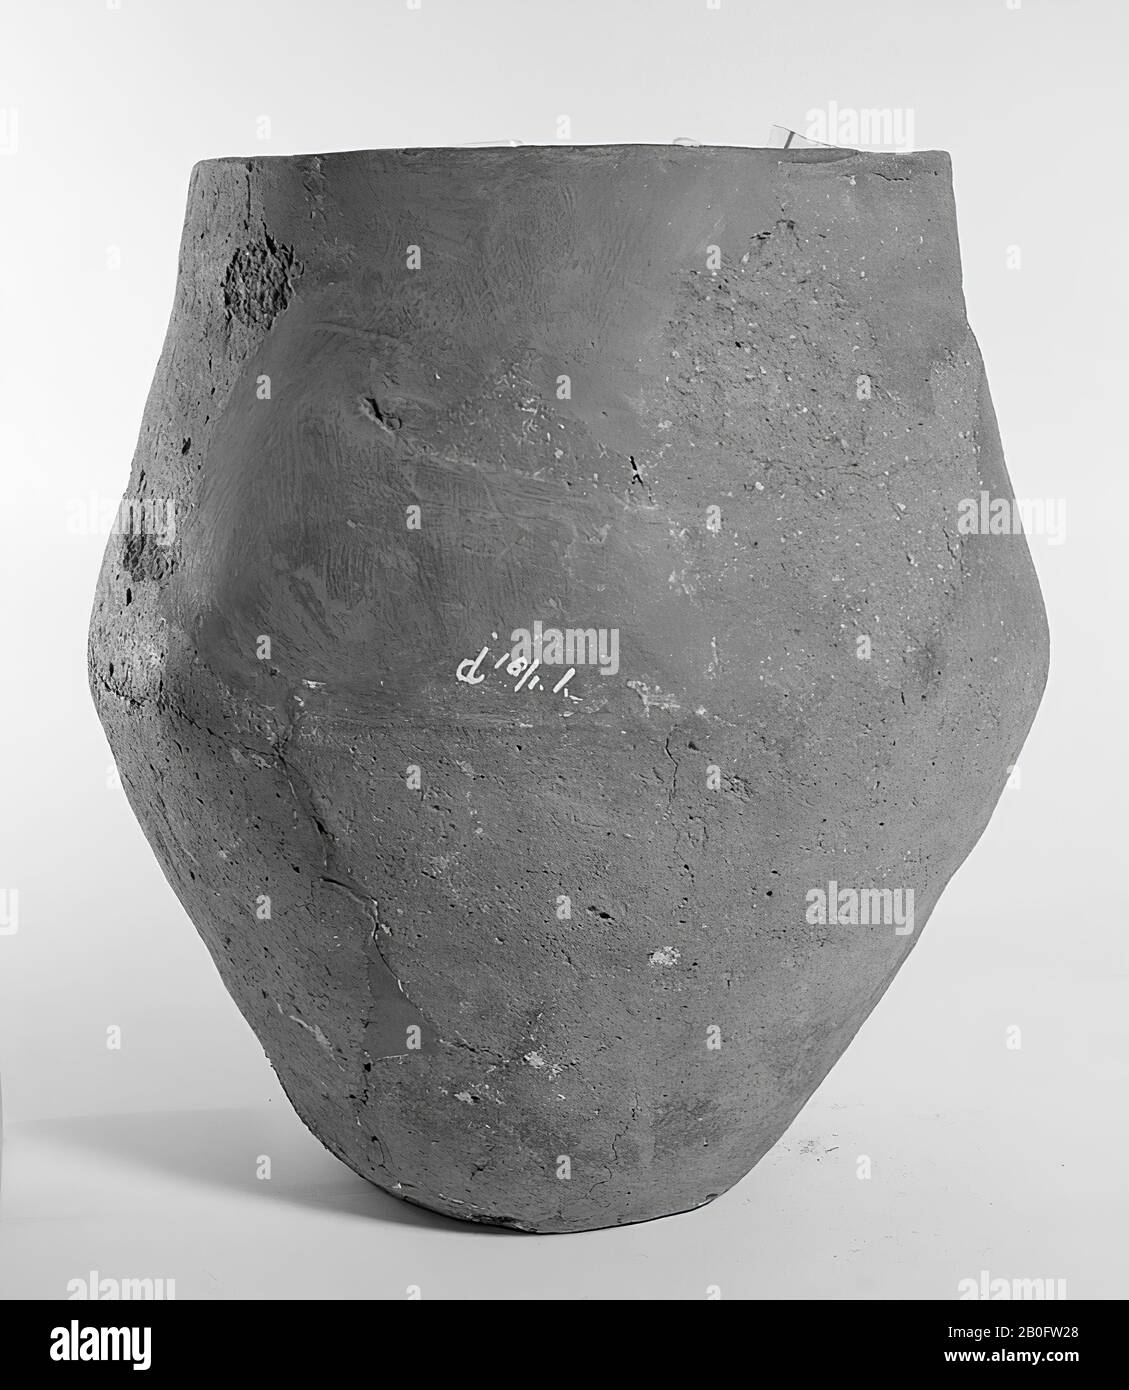 Urn of earthenware. Unstable old bonding and additions, cracks, surface damage. Contains cremated residues, urn, earthenware, h: 25 cm, diam: 22.5 cm, prehistory -1200 Stock Photo